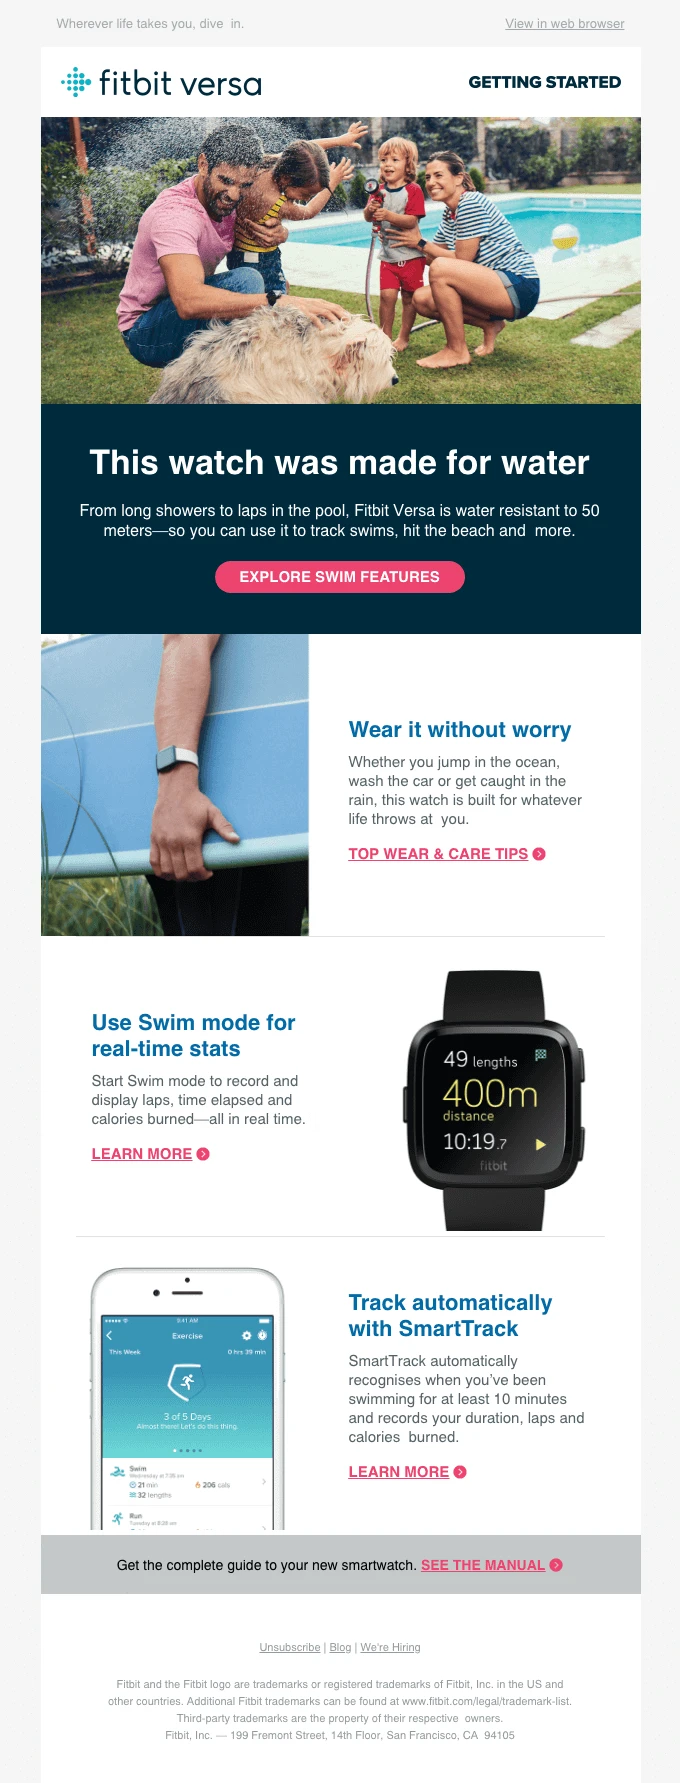 fitbit post purchase followup email automation example